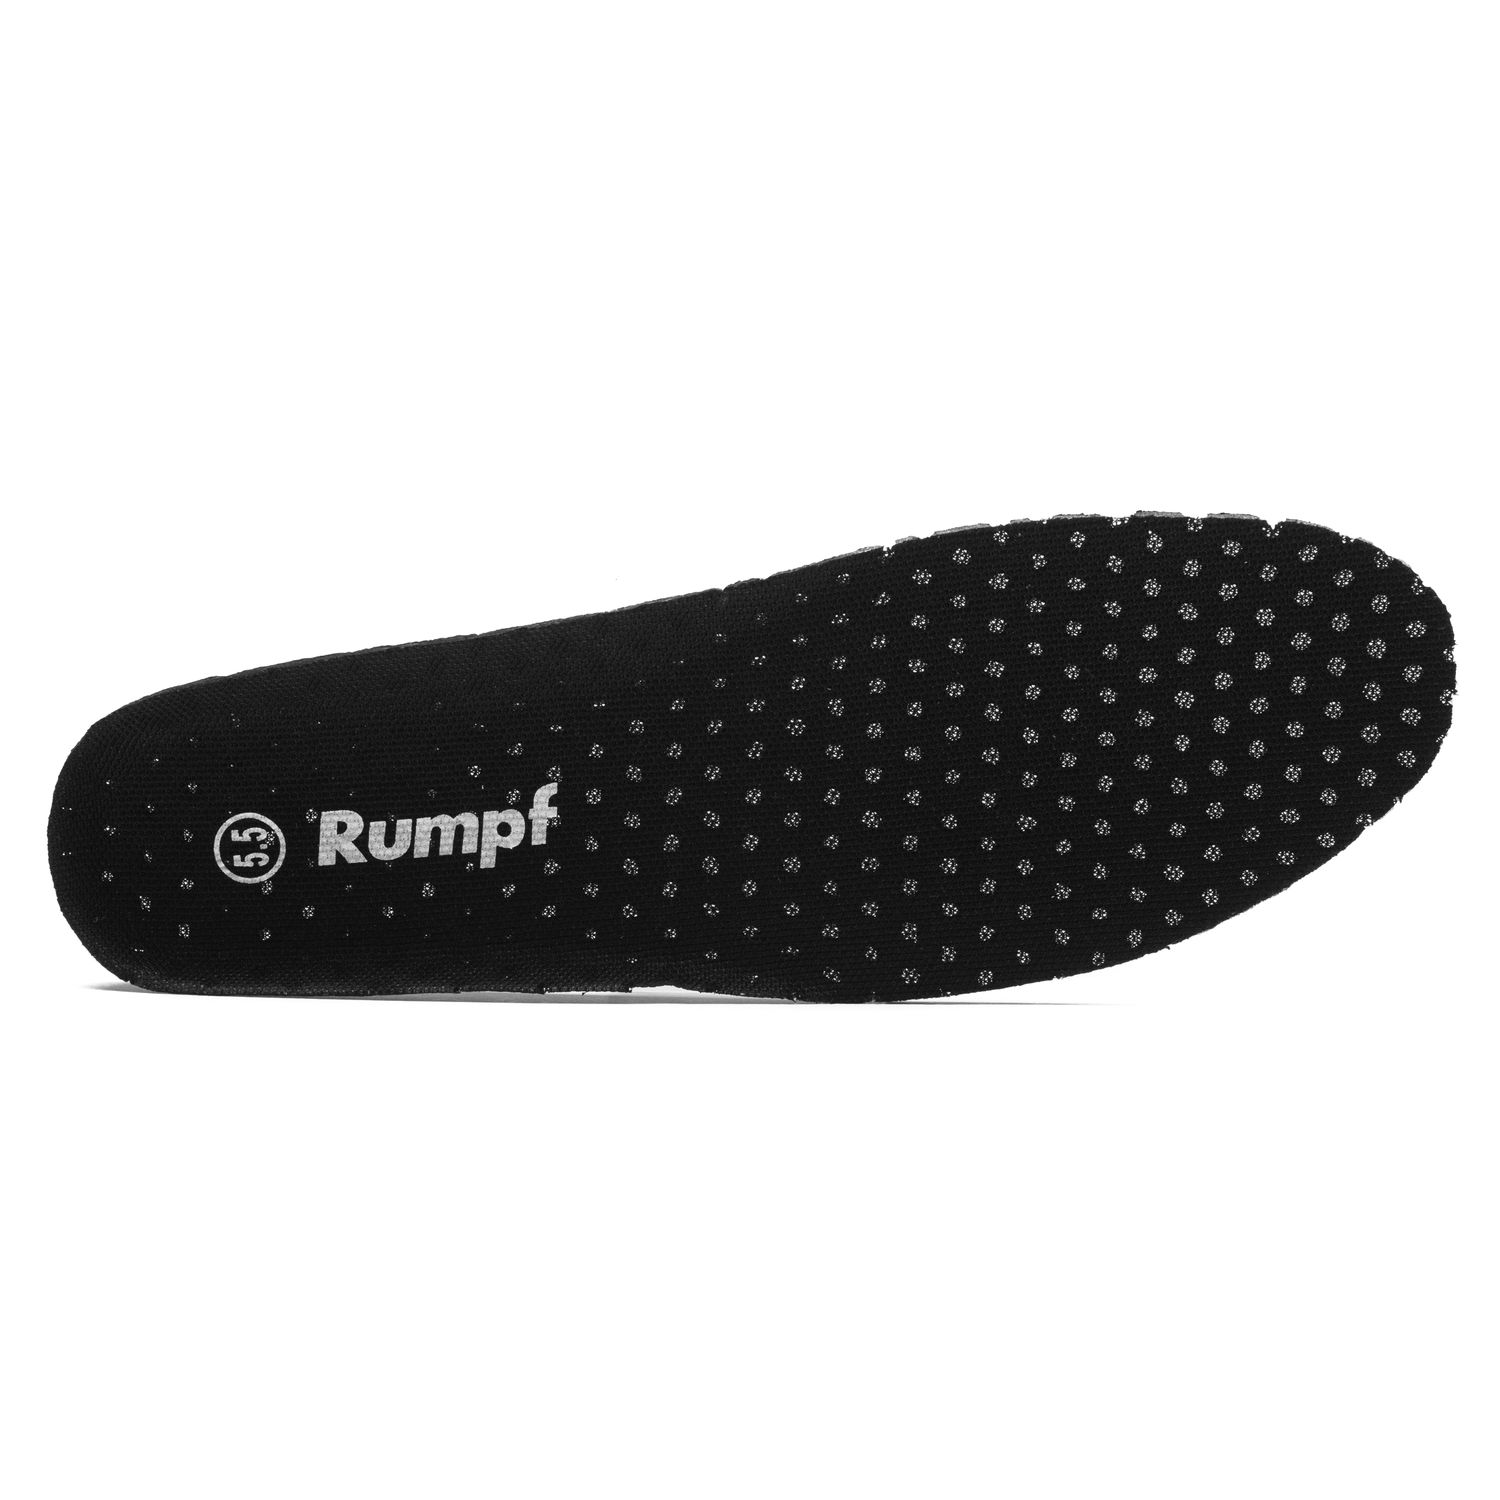 Five-pack Rumpf PERFORMANCE shoe insole 510-5